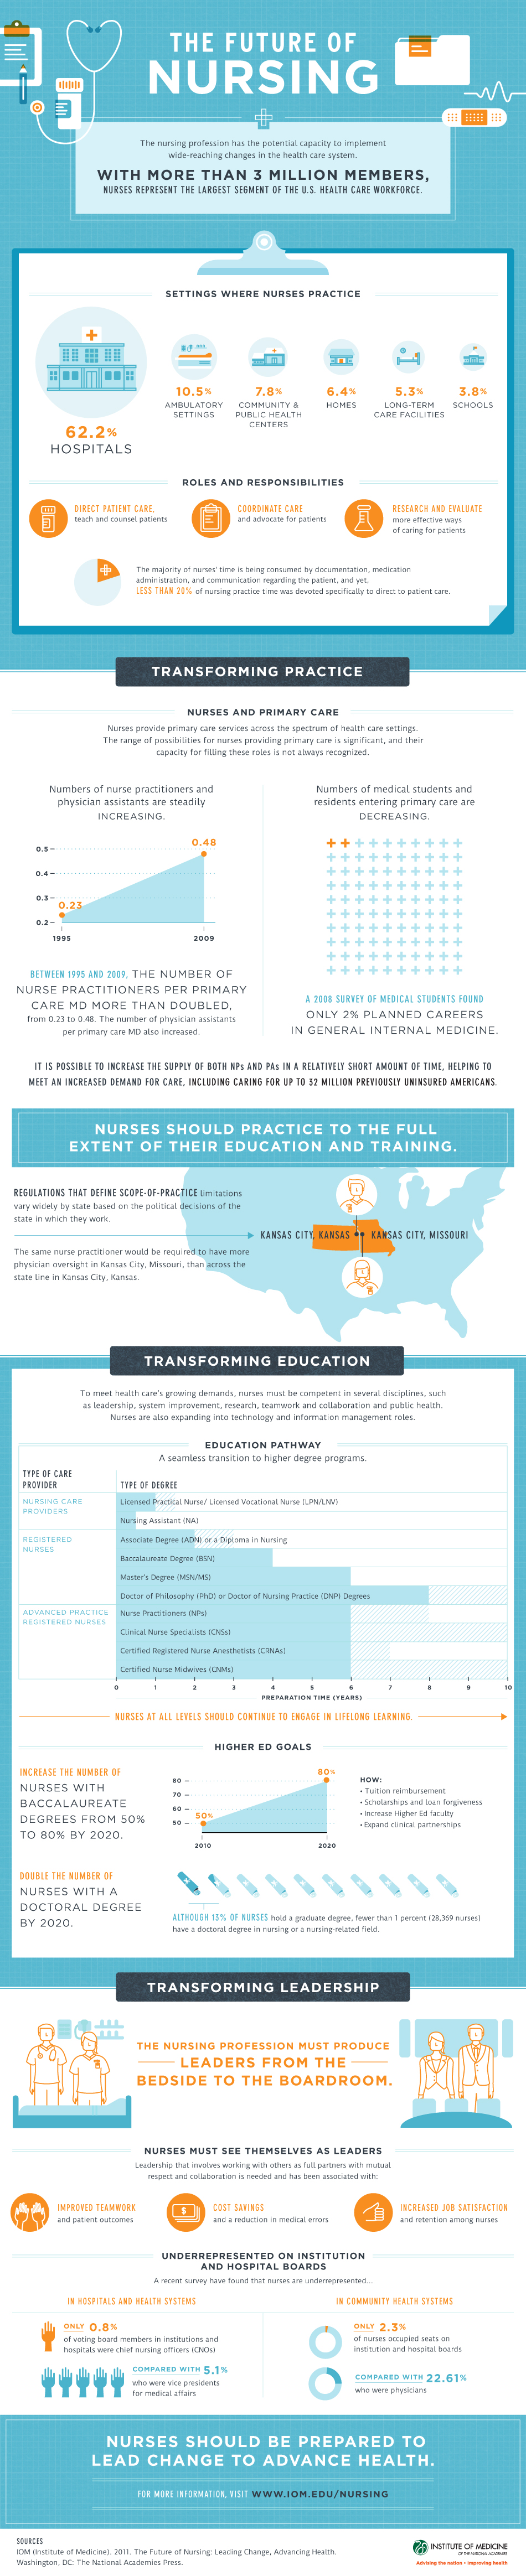 The Future of Nursing | Best Healthcare Infographics